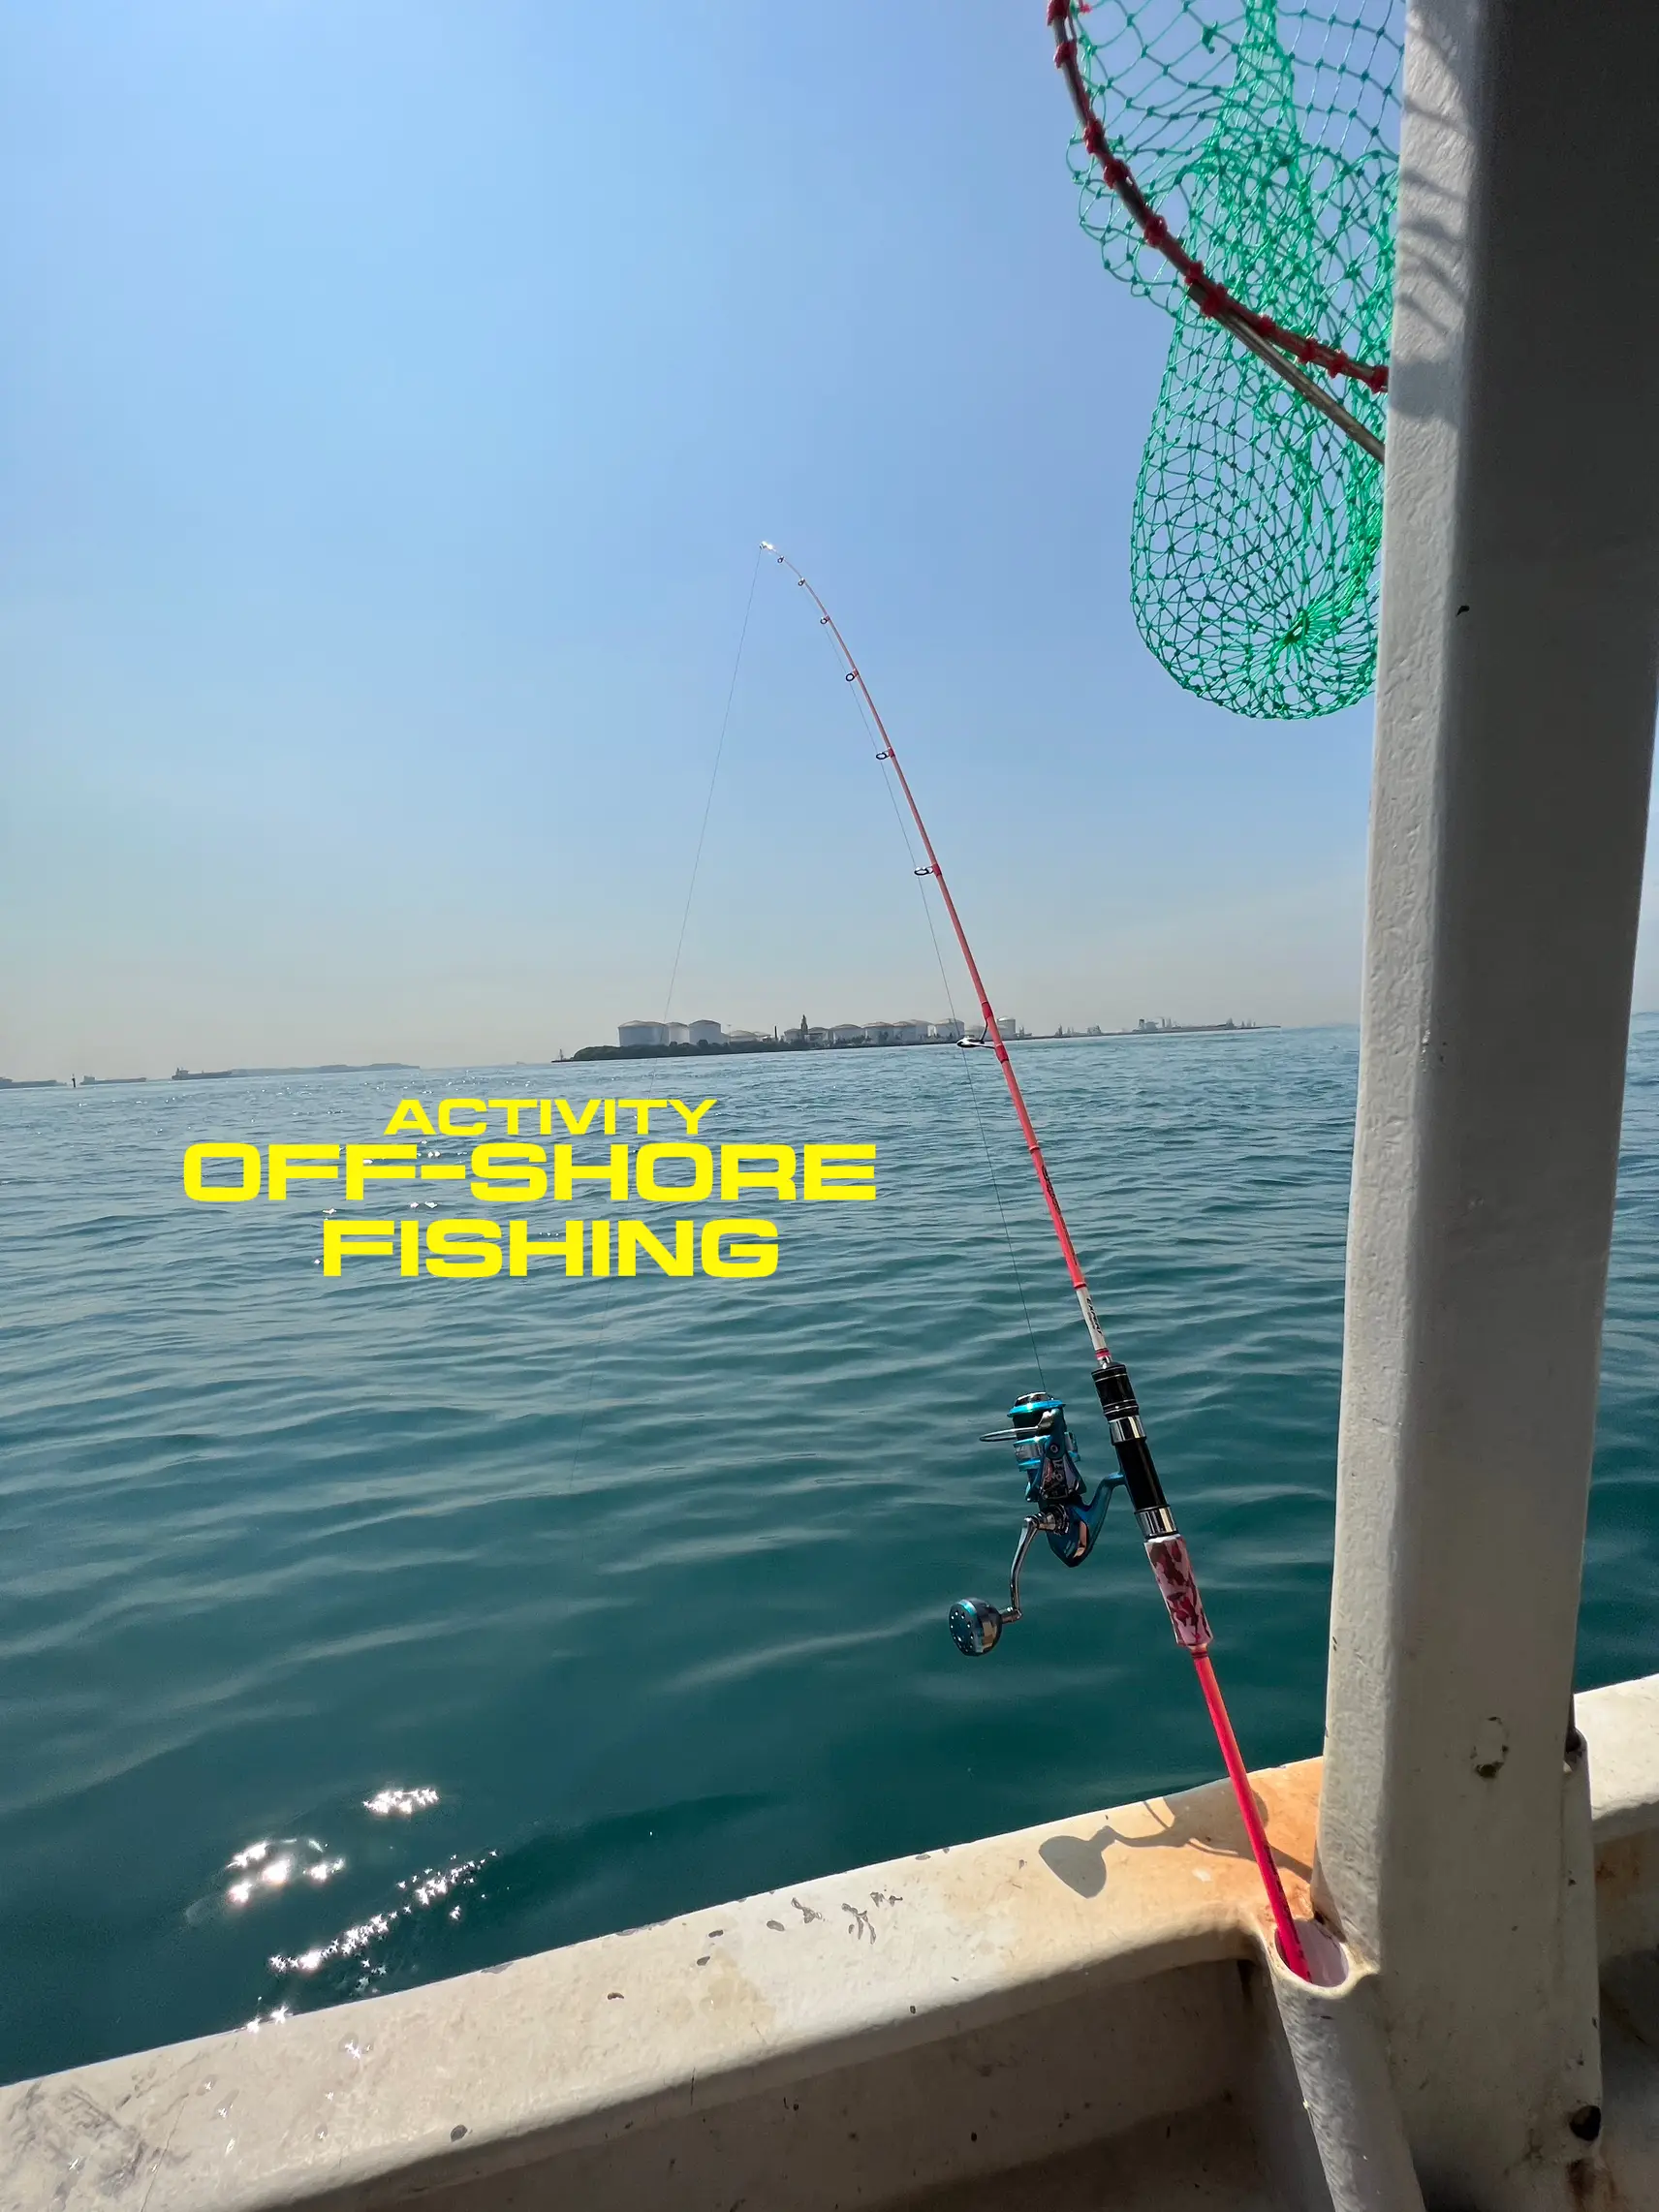 Things to do: Off-shore fishing!, Gallery posted by Ahhsheng 😃